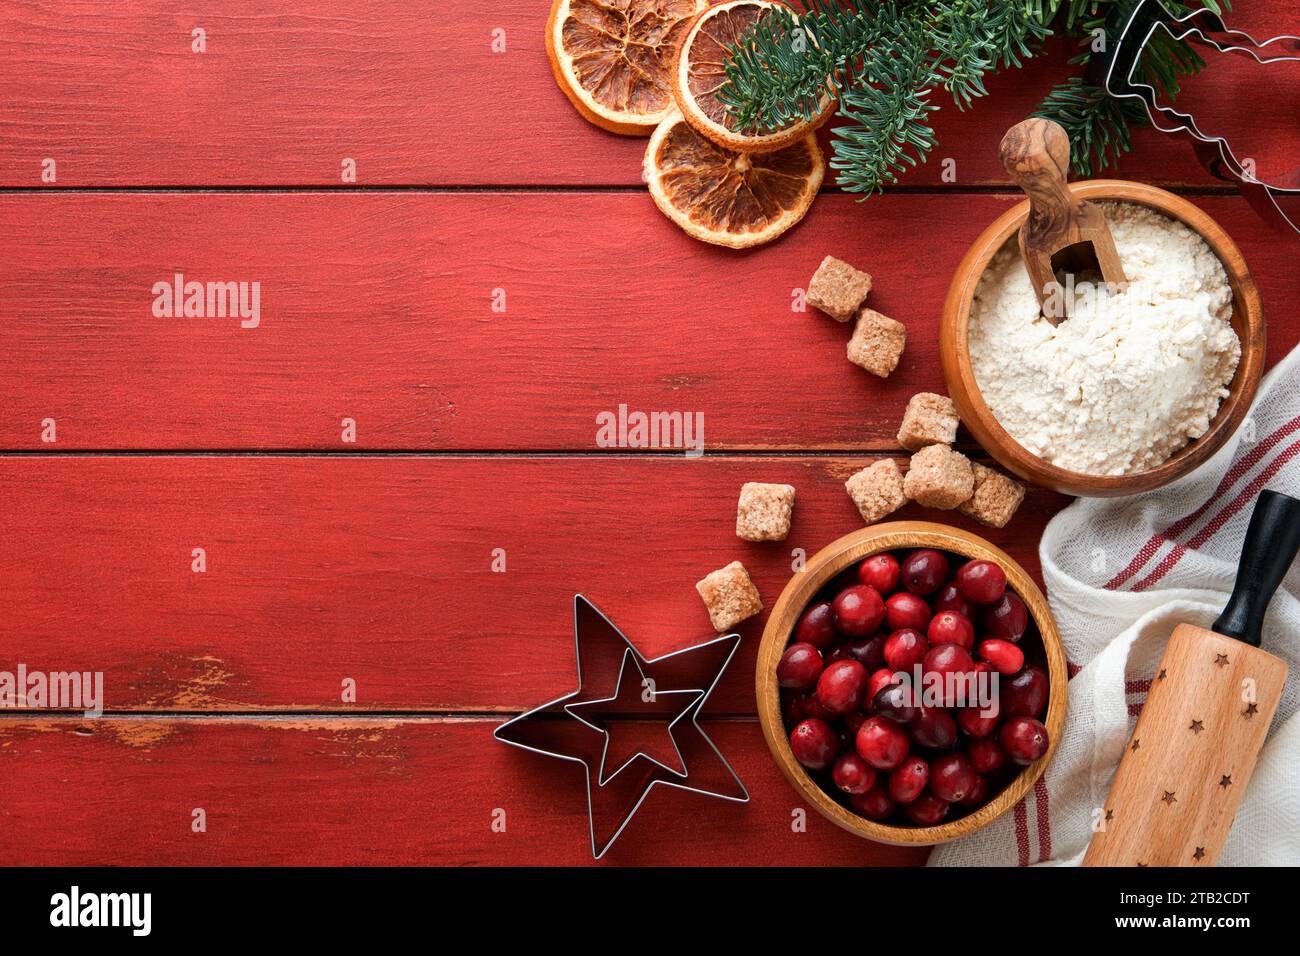 Christmas culinary background with ingredients for cooking christmas baking cranberries, sugar, cinnamon and Christmas tree branches on rustic old red Stock Photo